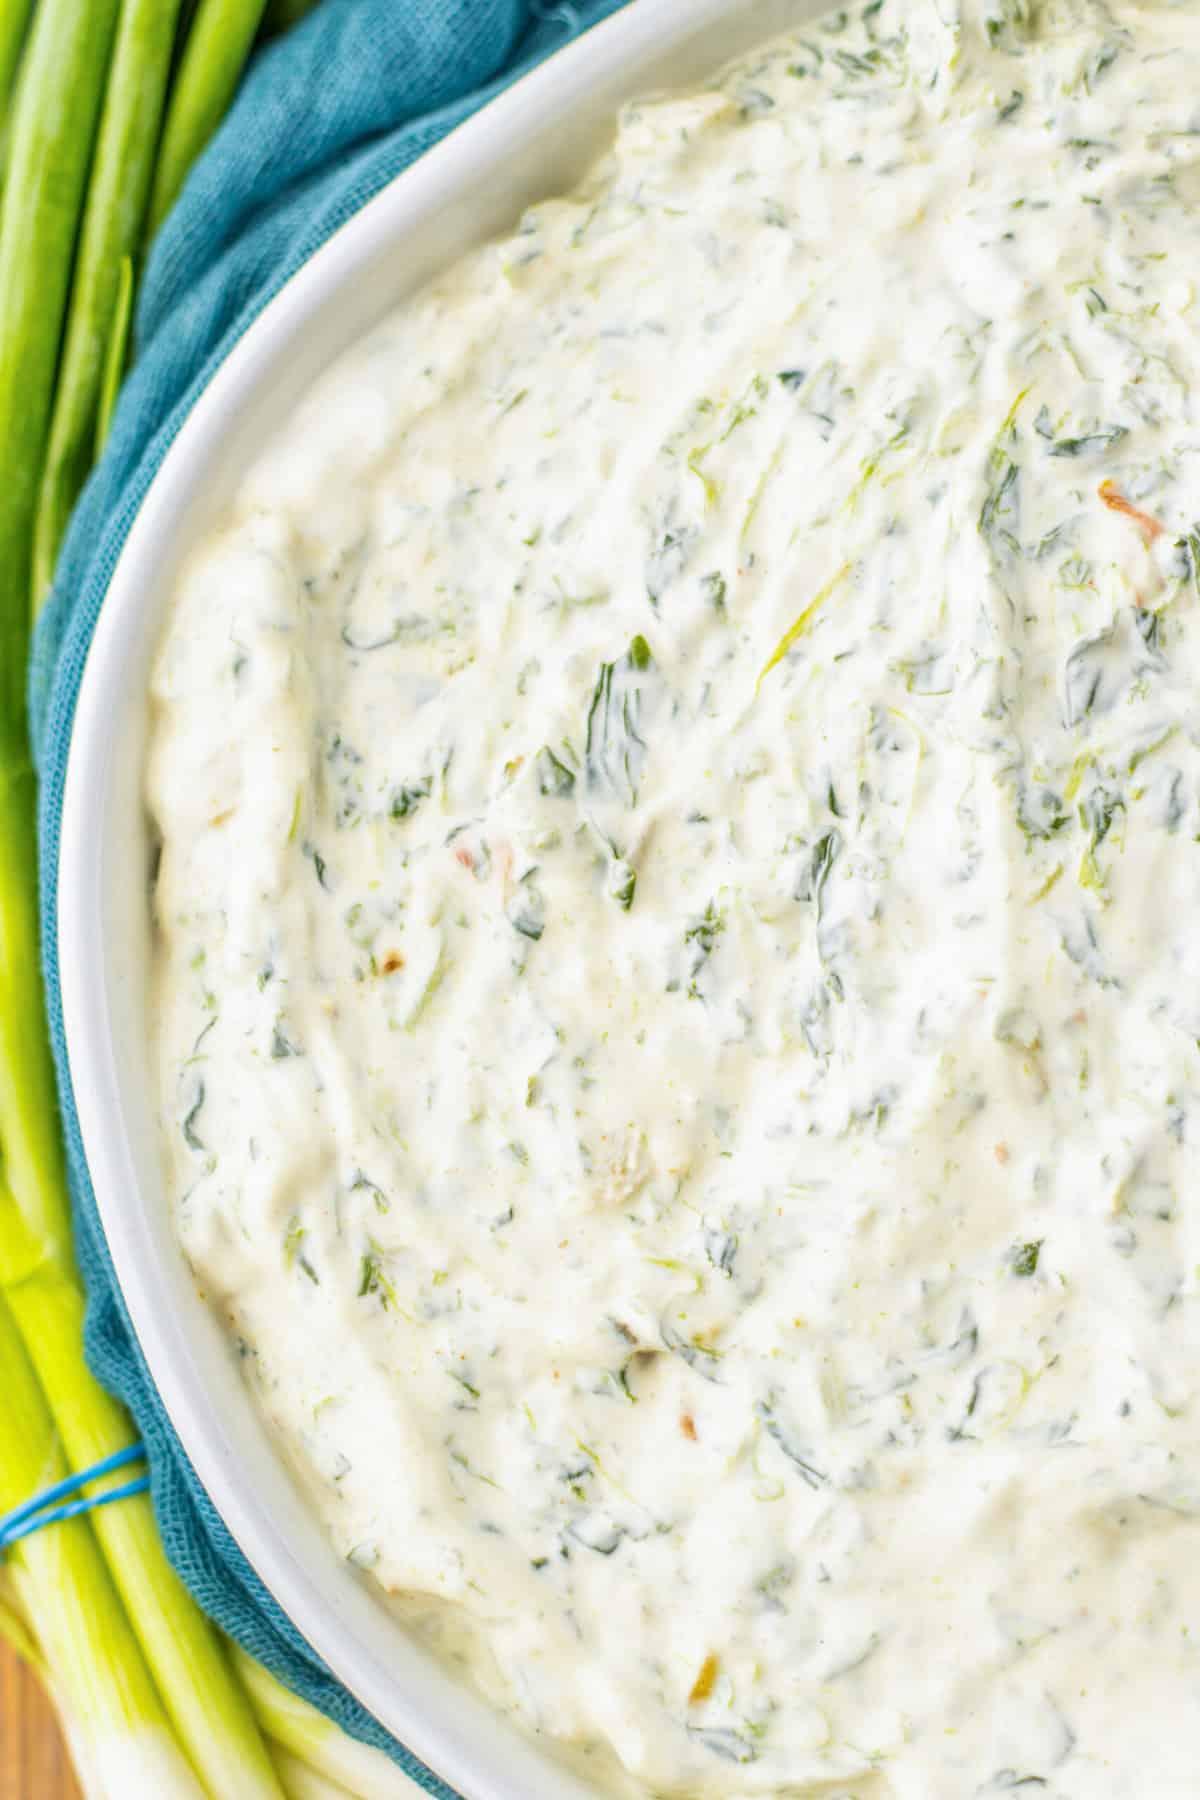 Close up to show creamy texture of Knorr vegetable mix spinach dip.